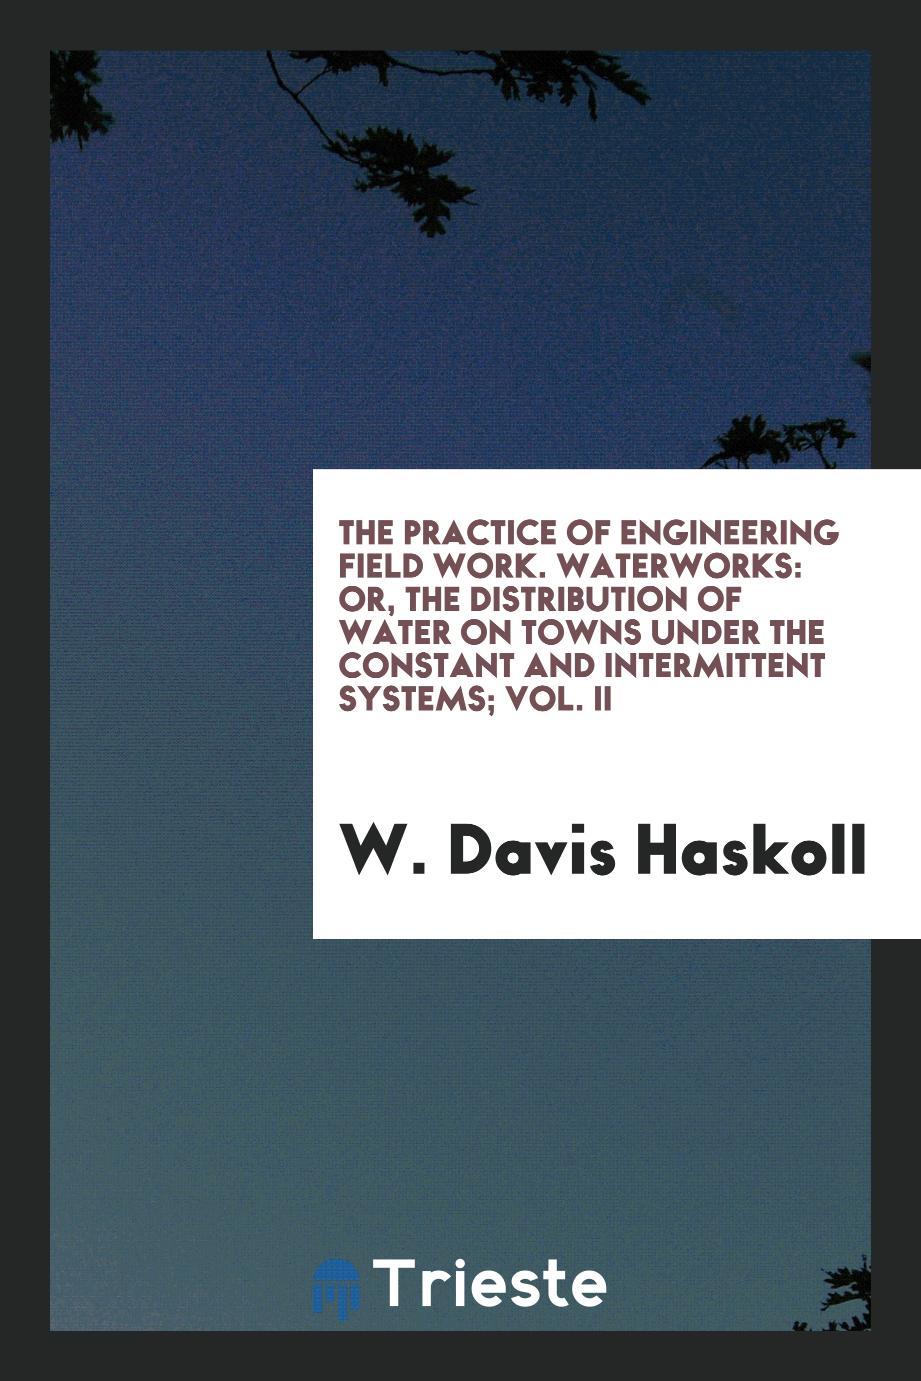 The Practice of Engineering Field Work. Waterworks: Or, the Distribution of Water on Towns Under the Constant and Intermittent Systems; Vol. II